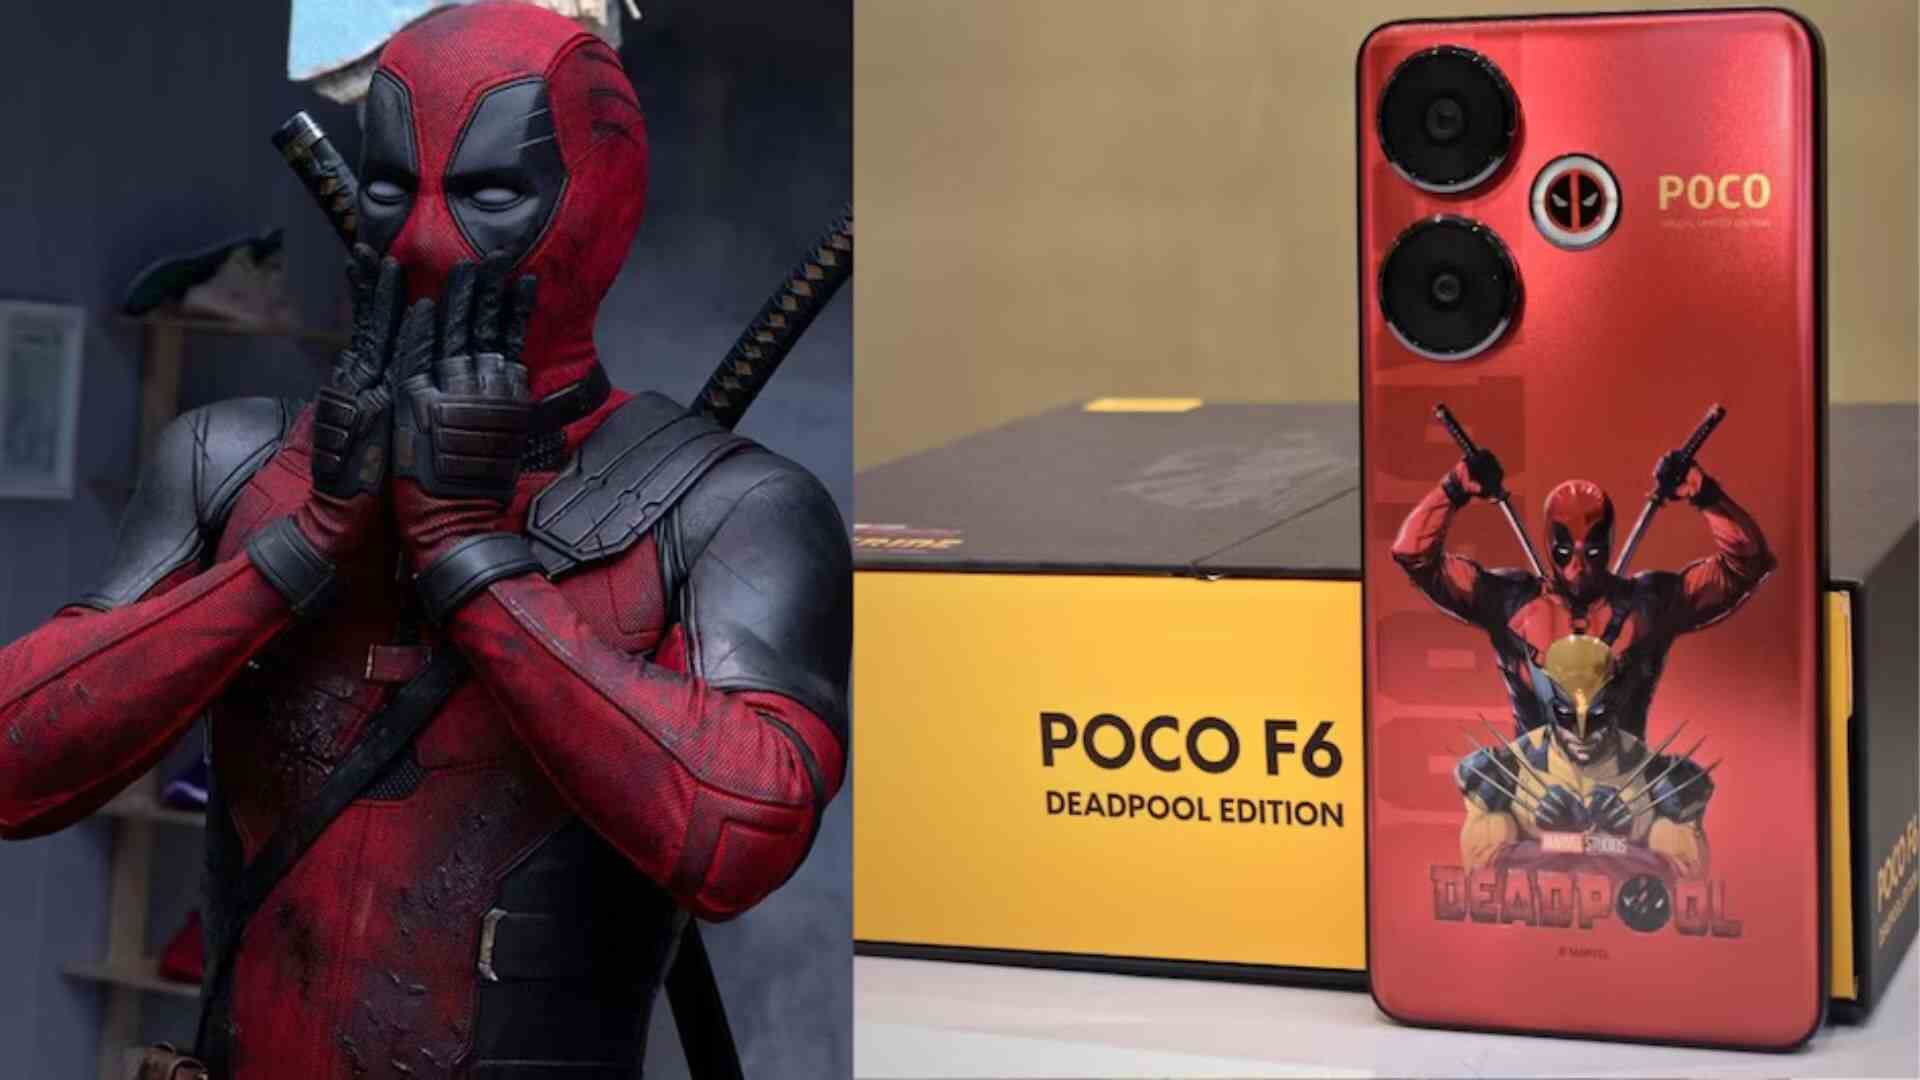 Poco F6 Deadpool Limited Edition Unveils In India: Check Out Price, Specs